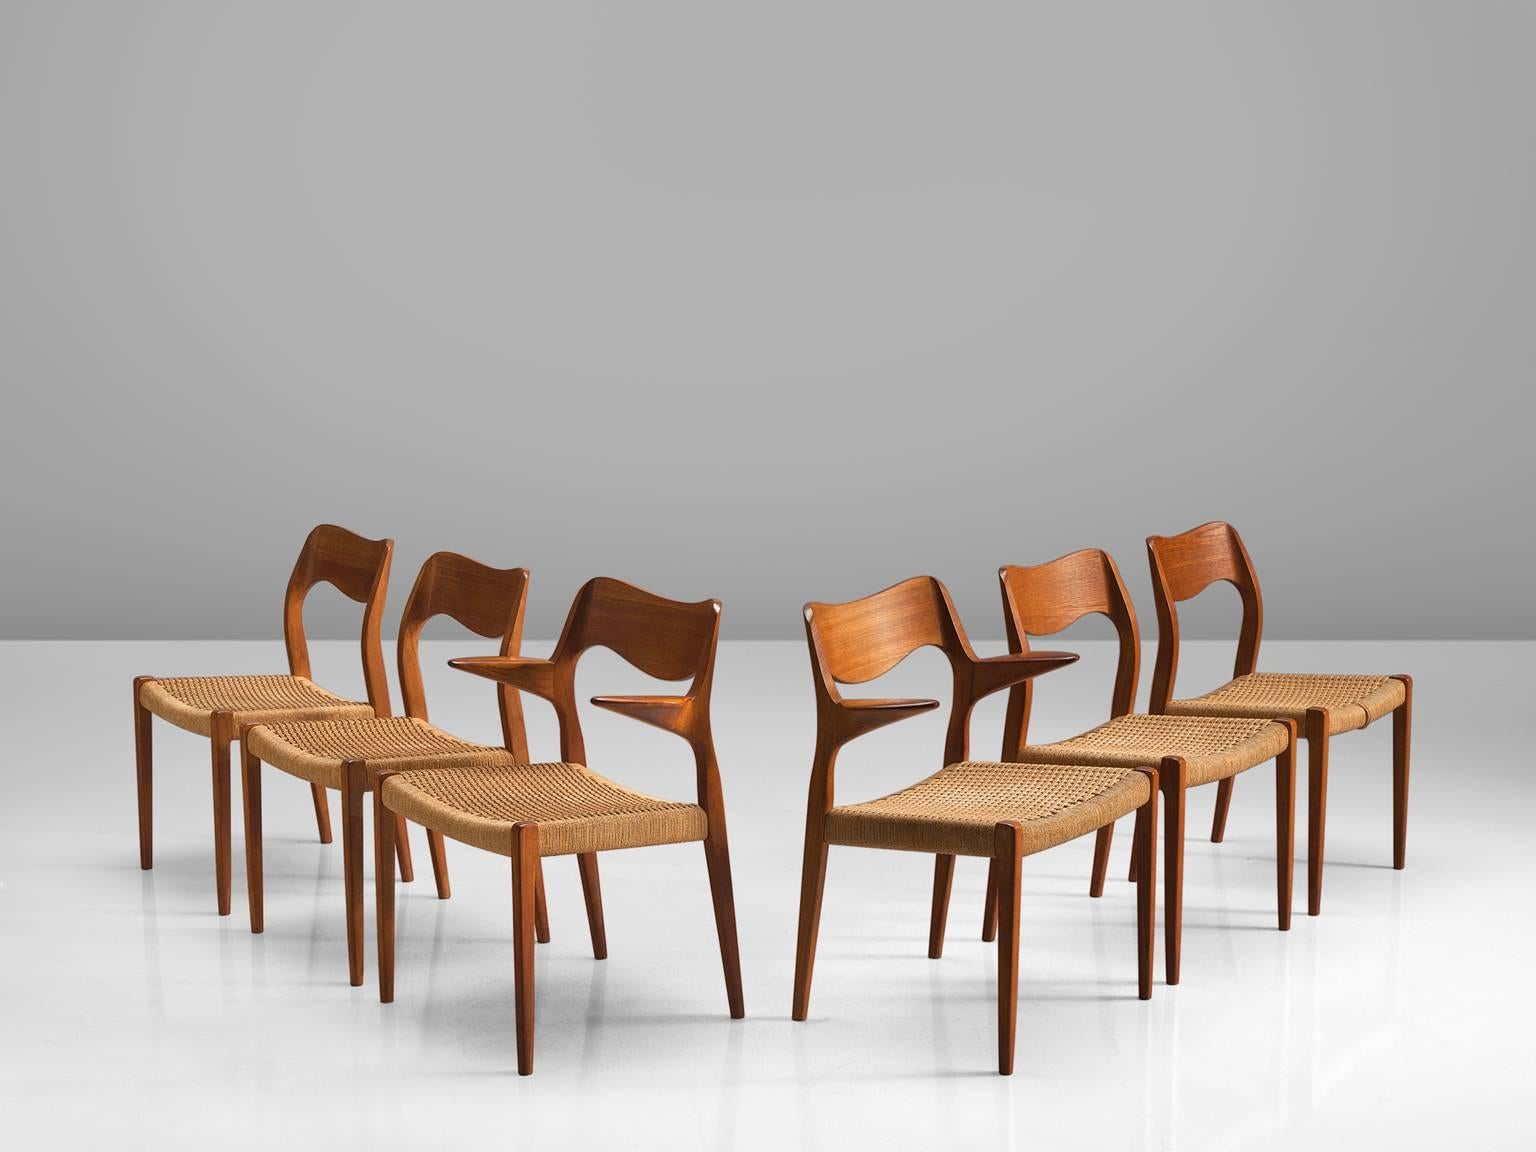 Niels O. Møller, armchairs model 55 and four dining chairs model 71, teak and cane, Denmark, 1950s.

These chairs designed by Niels Møller show subtle lines and beautiful curves of the woodwork. Two of the chairs feature short, pointy armrests